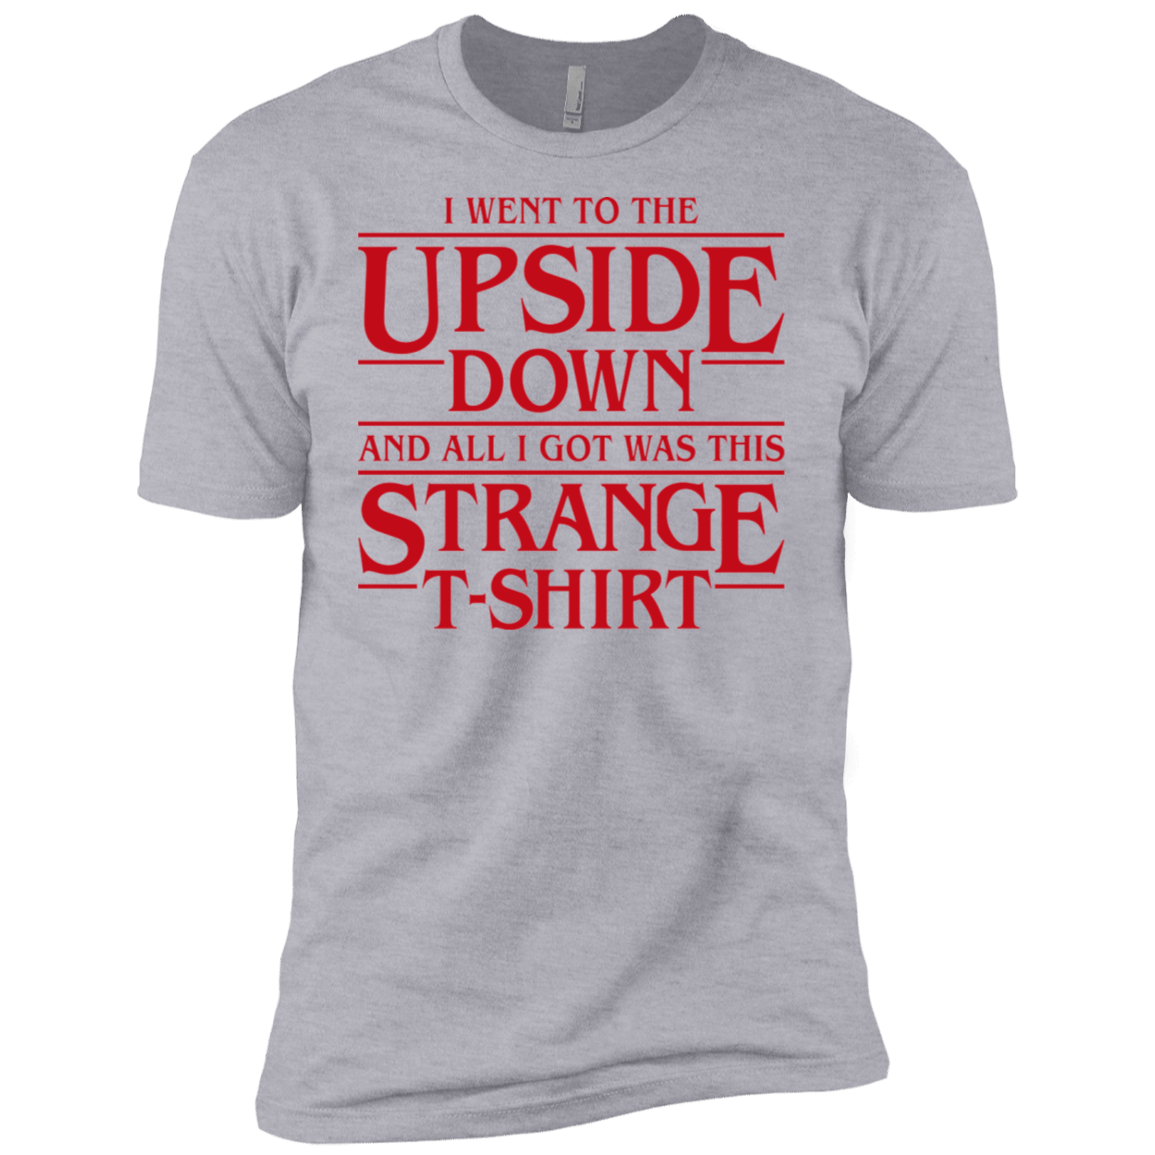 T-Shirts Heather Grey / X-Small I Went to the Upside Down Men's Premium T-Shirt